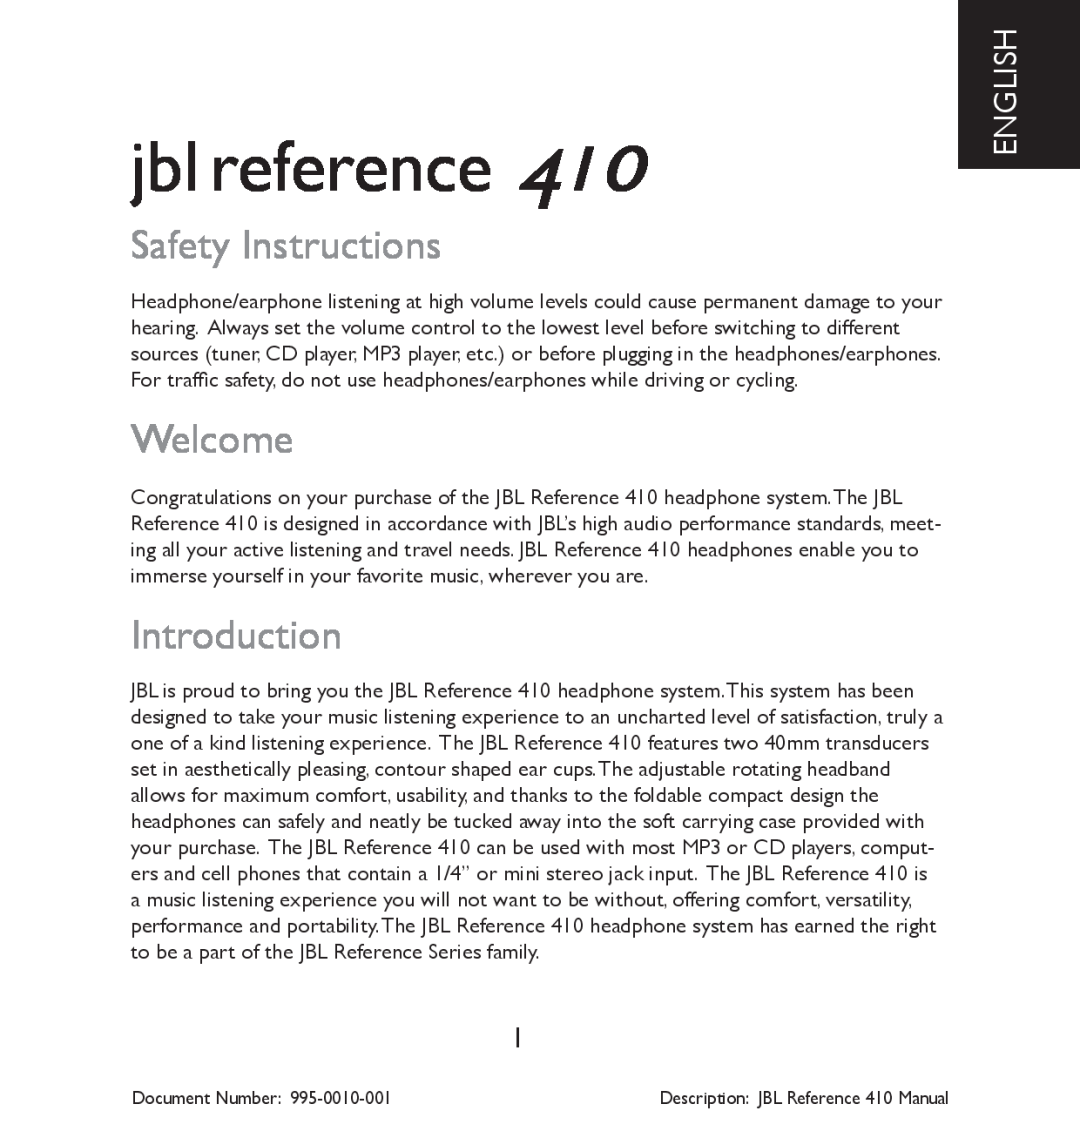 JBL 410 manual jbl reference, Safety Instructions, Welcome, Introduction, English 